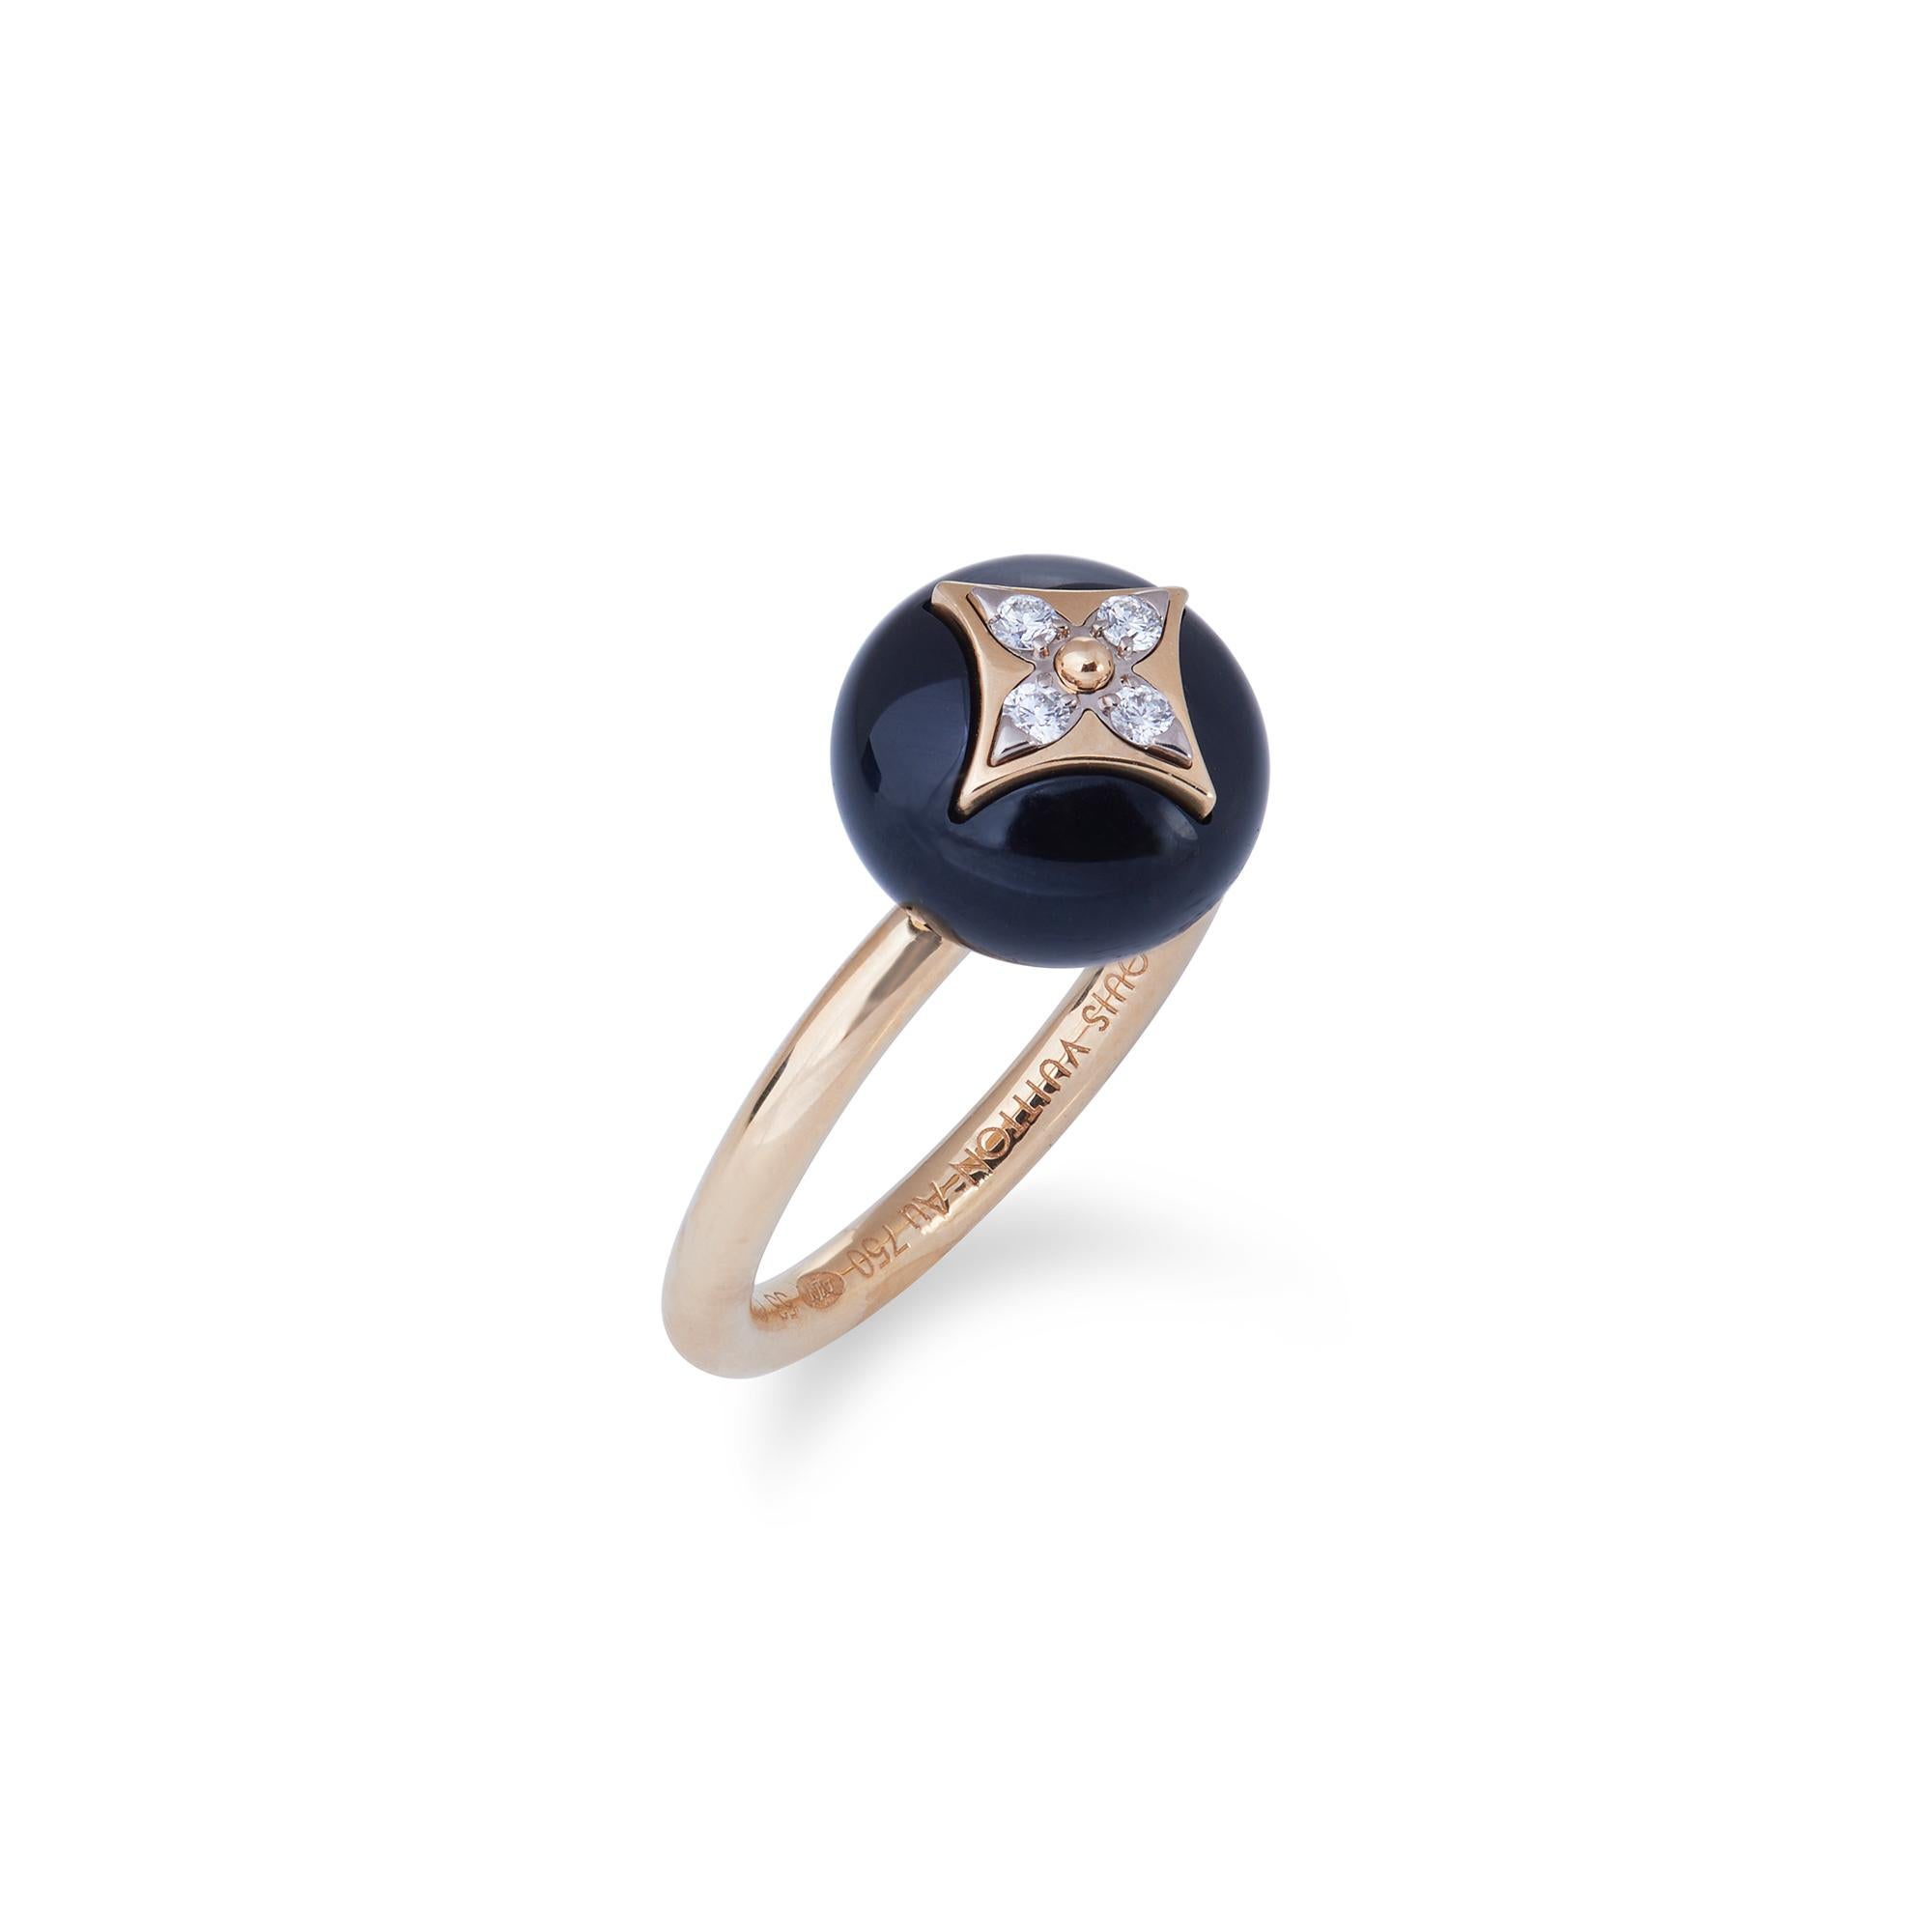 Louis Vuitton B Blossom Ring - For Sale on 1stDibs